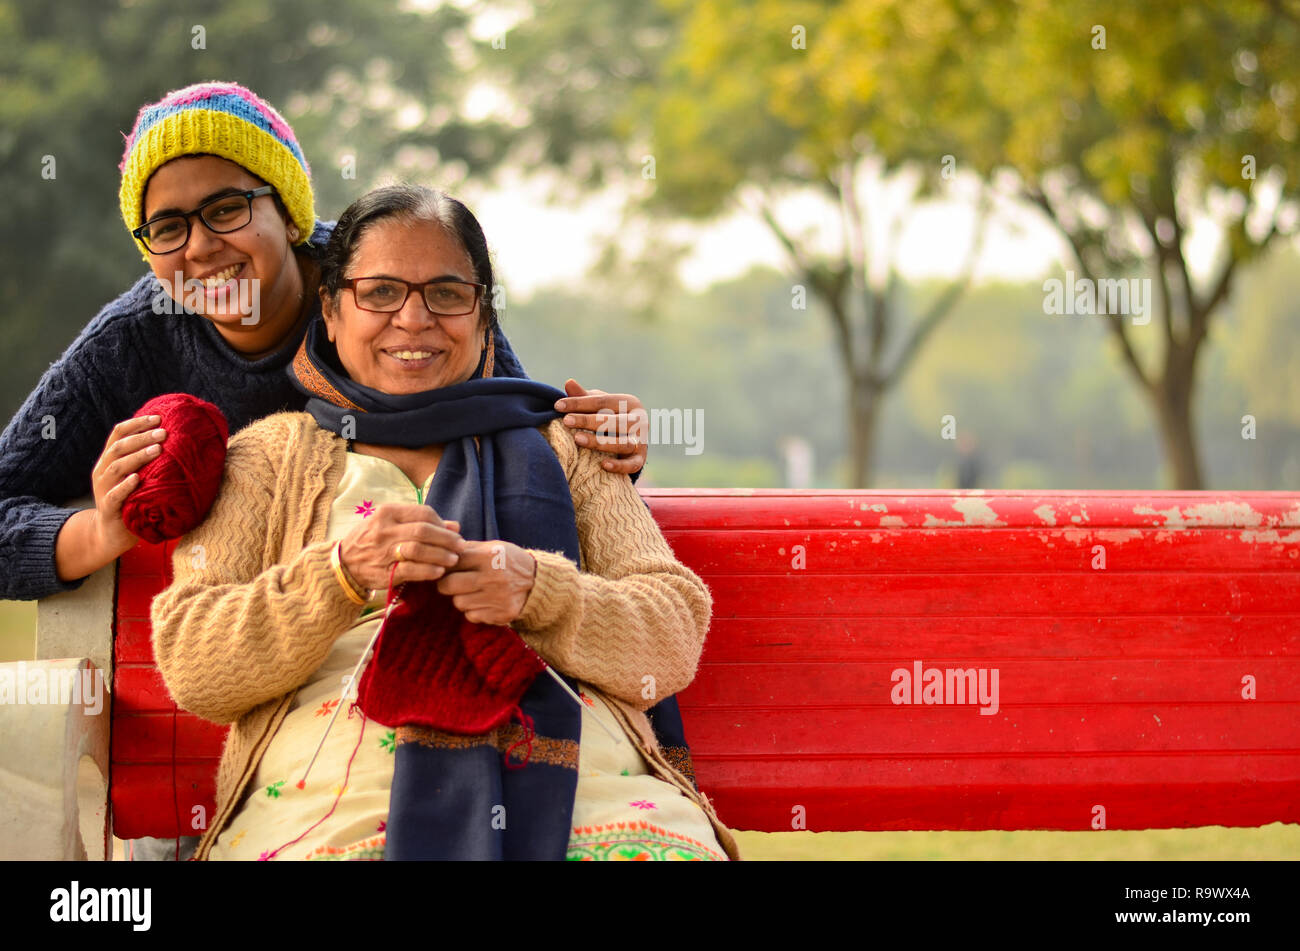 Happy looking young Indian woman with her mother knitting sweater who is sitting on a red bench in a park in Delhi, India Stock Photo